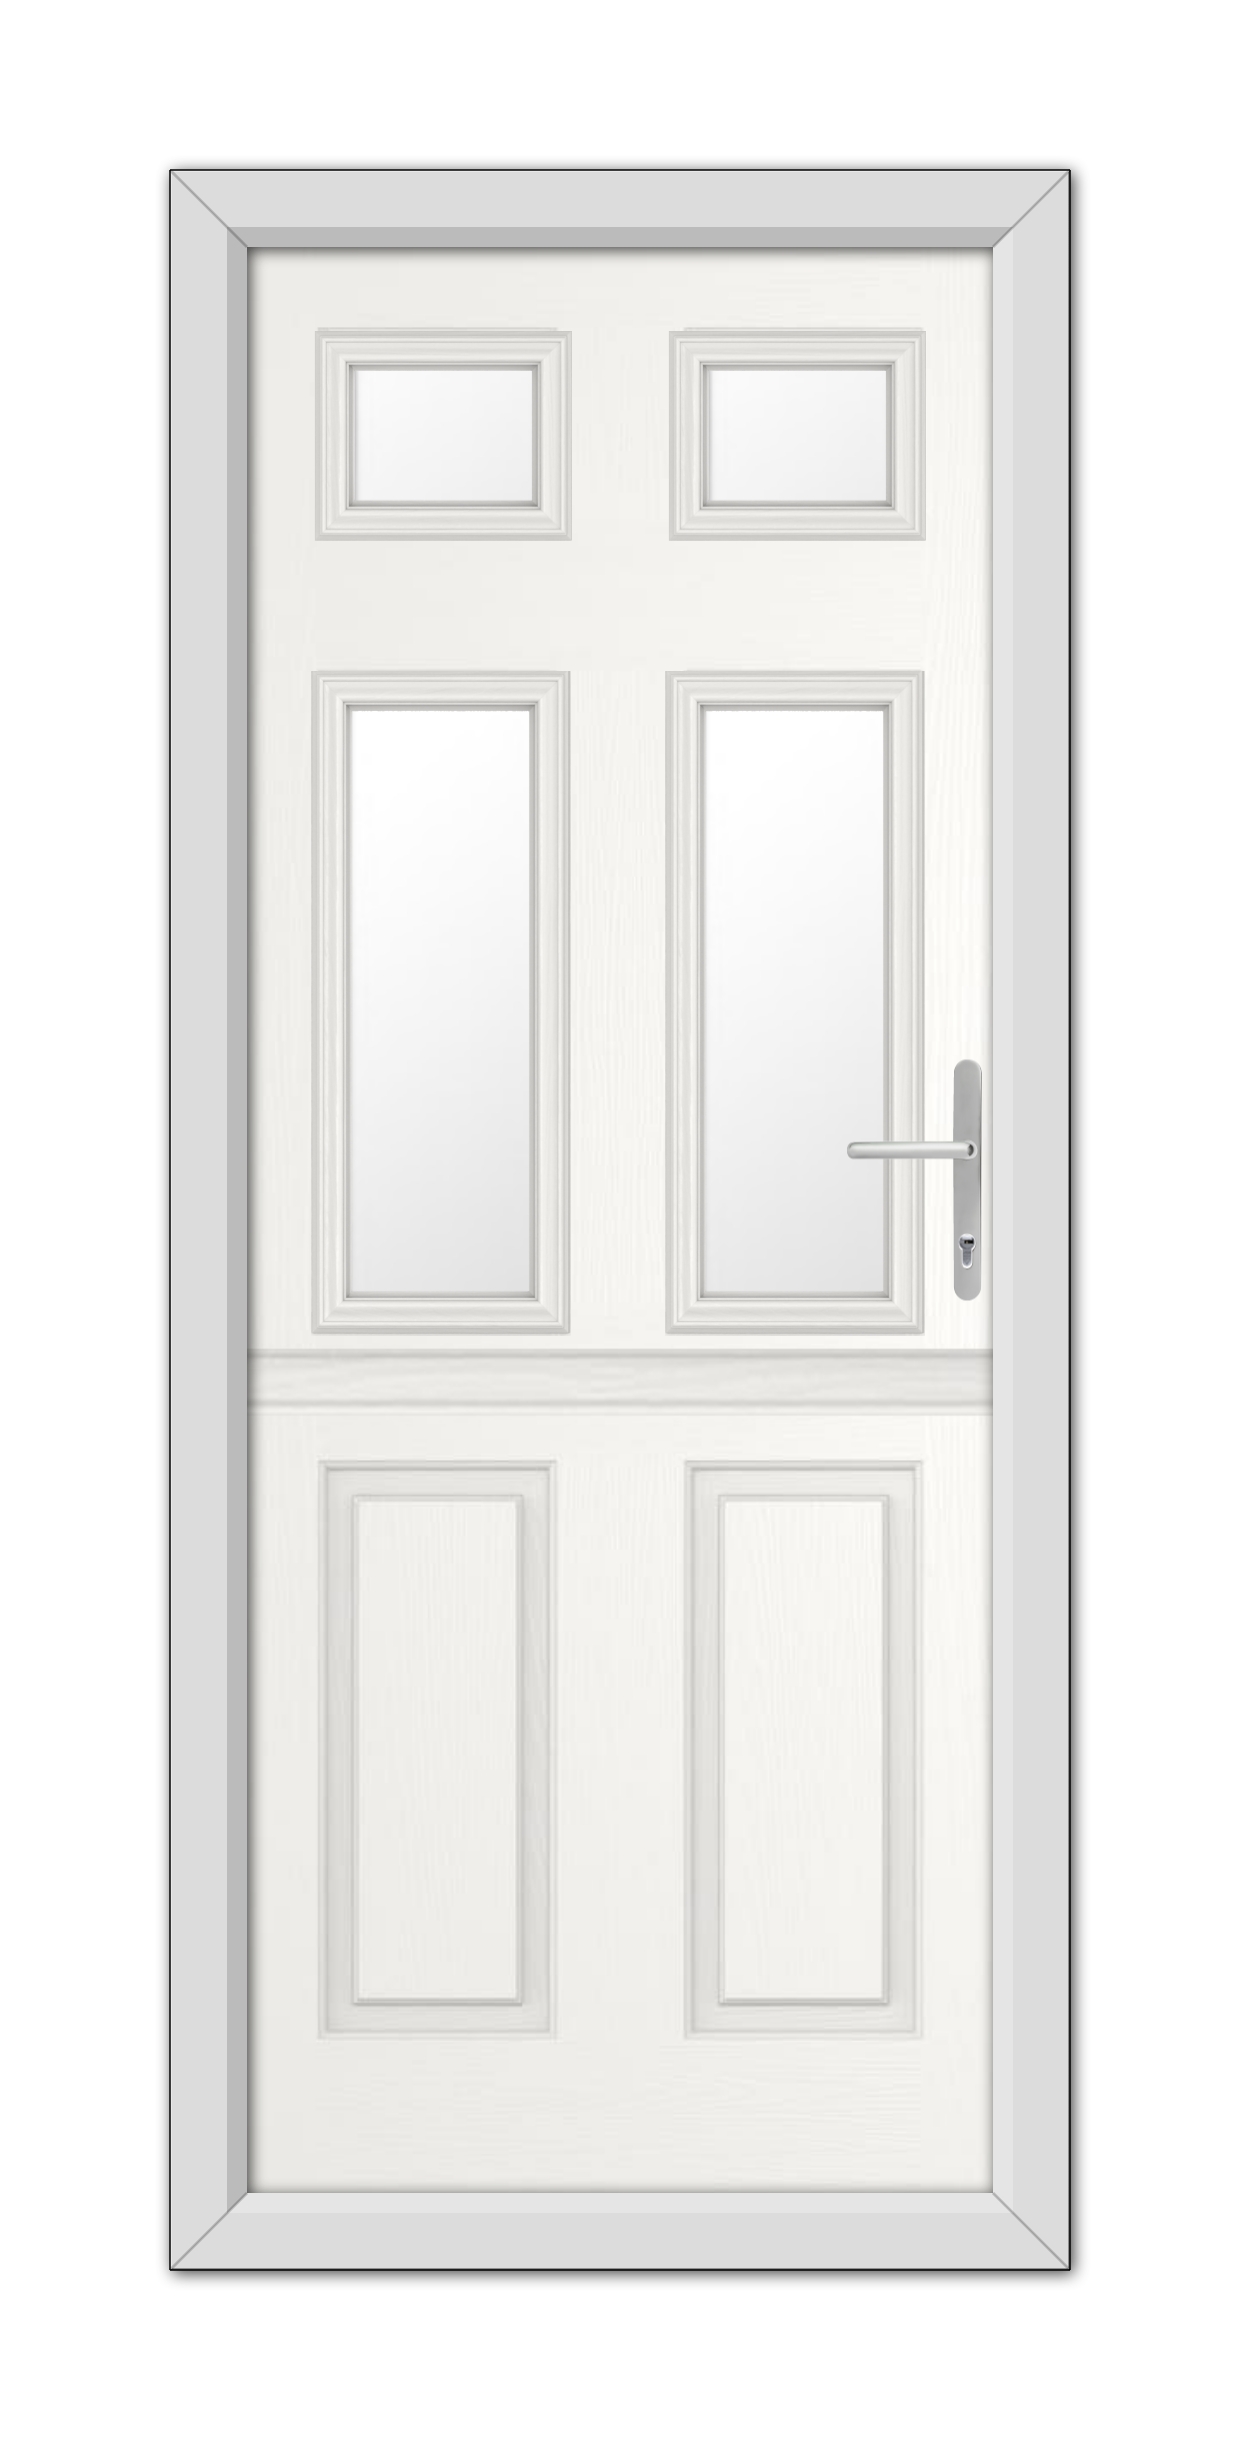 A closed White Middleton Glazed 4 Stable Composite Door 48mm Timber Core with a modern handle, featuring a framed design and two narrow glass panels at the top.